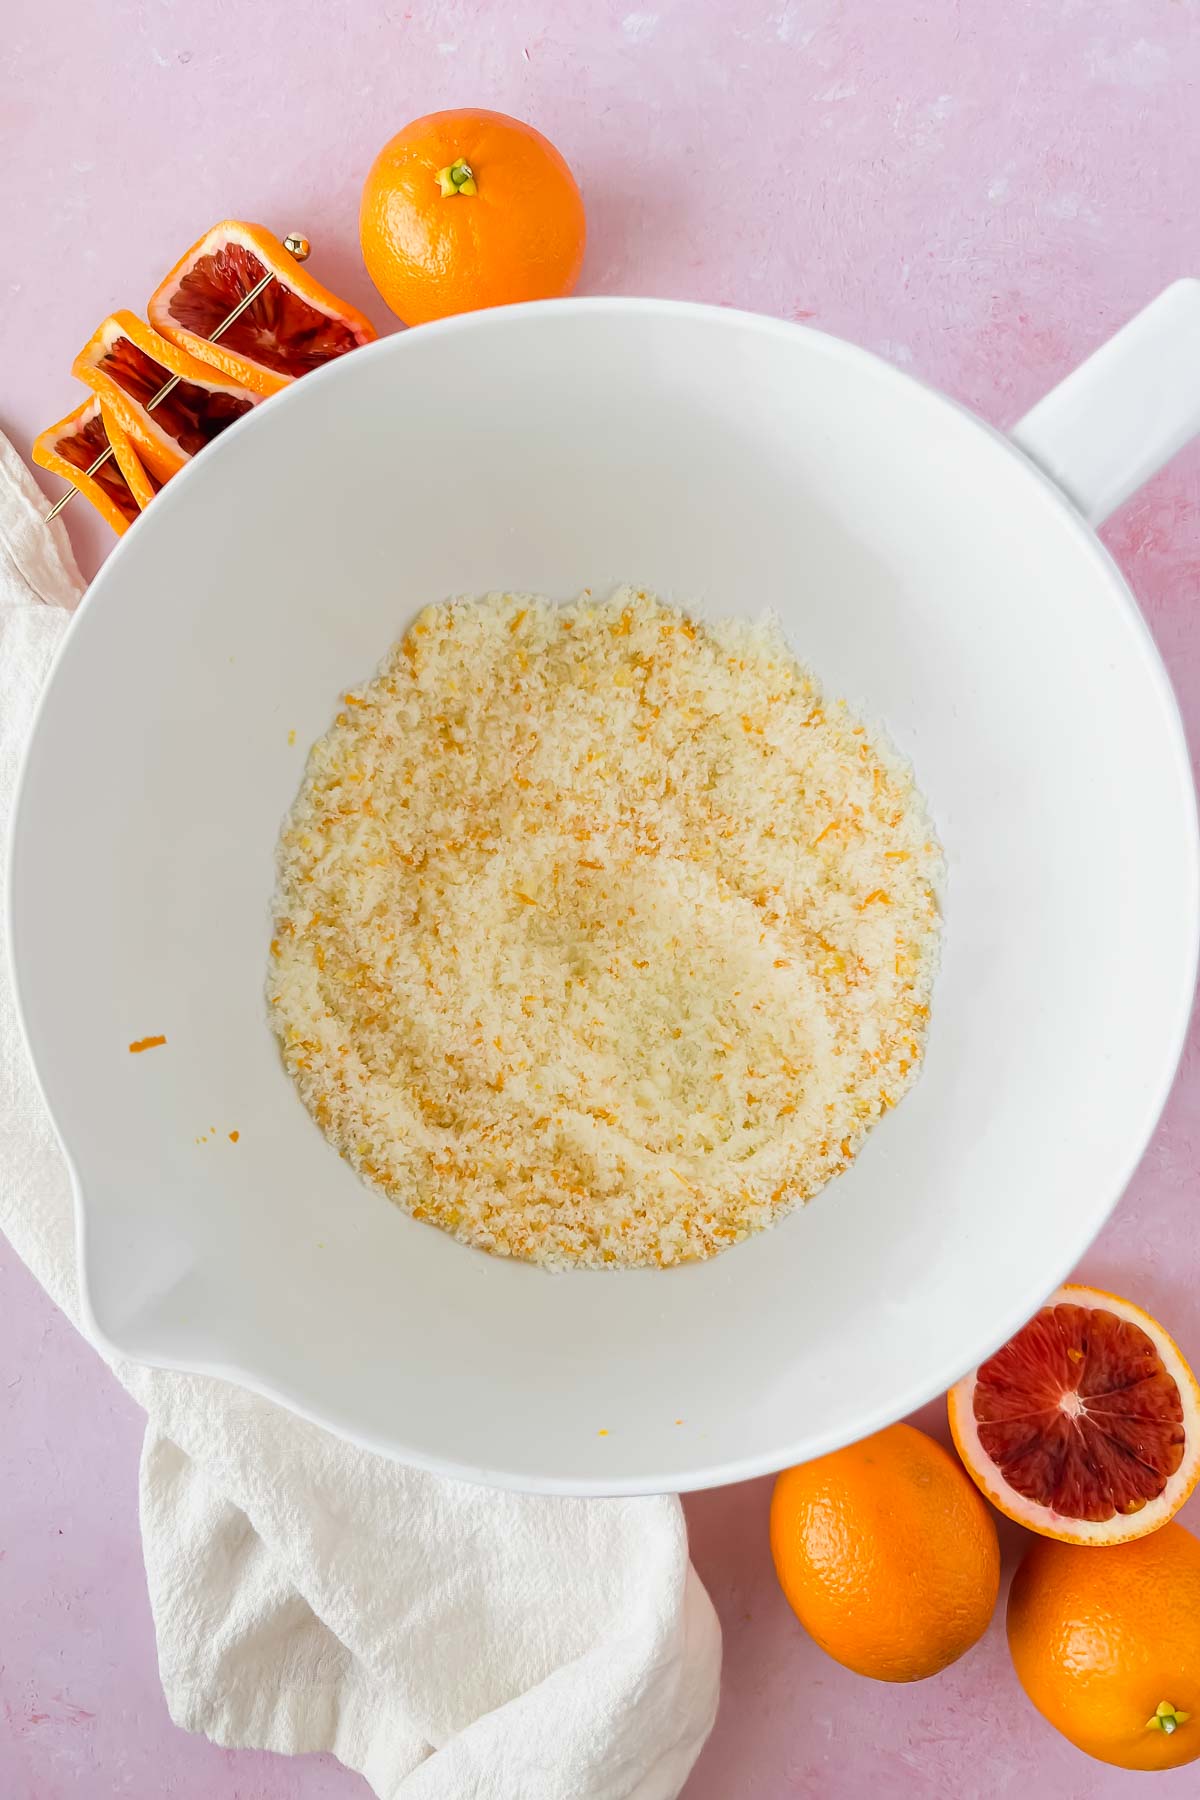 butter and blood orange zest mixed in white mixing bowl.